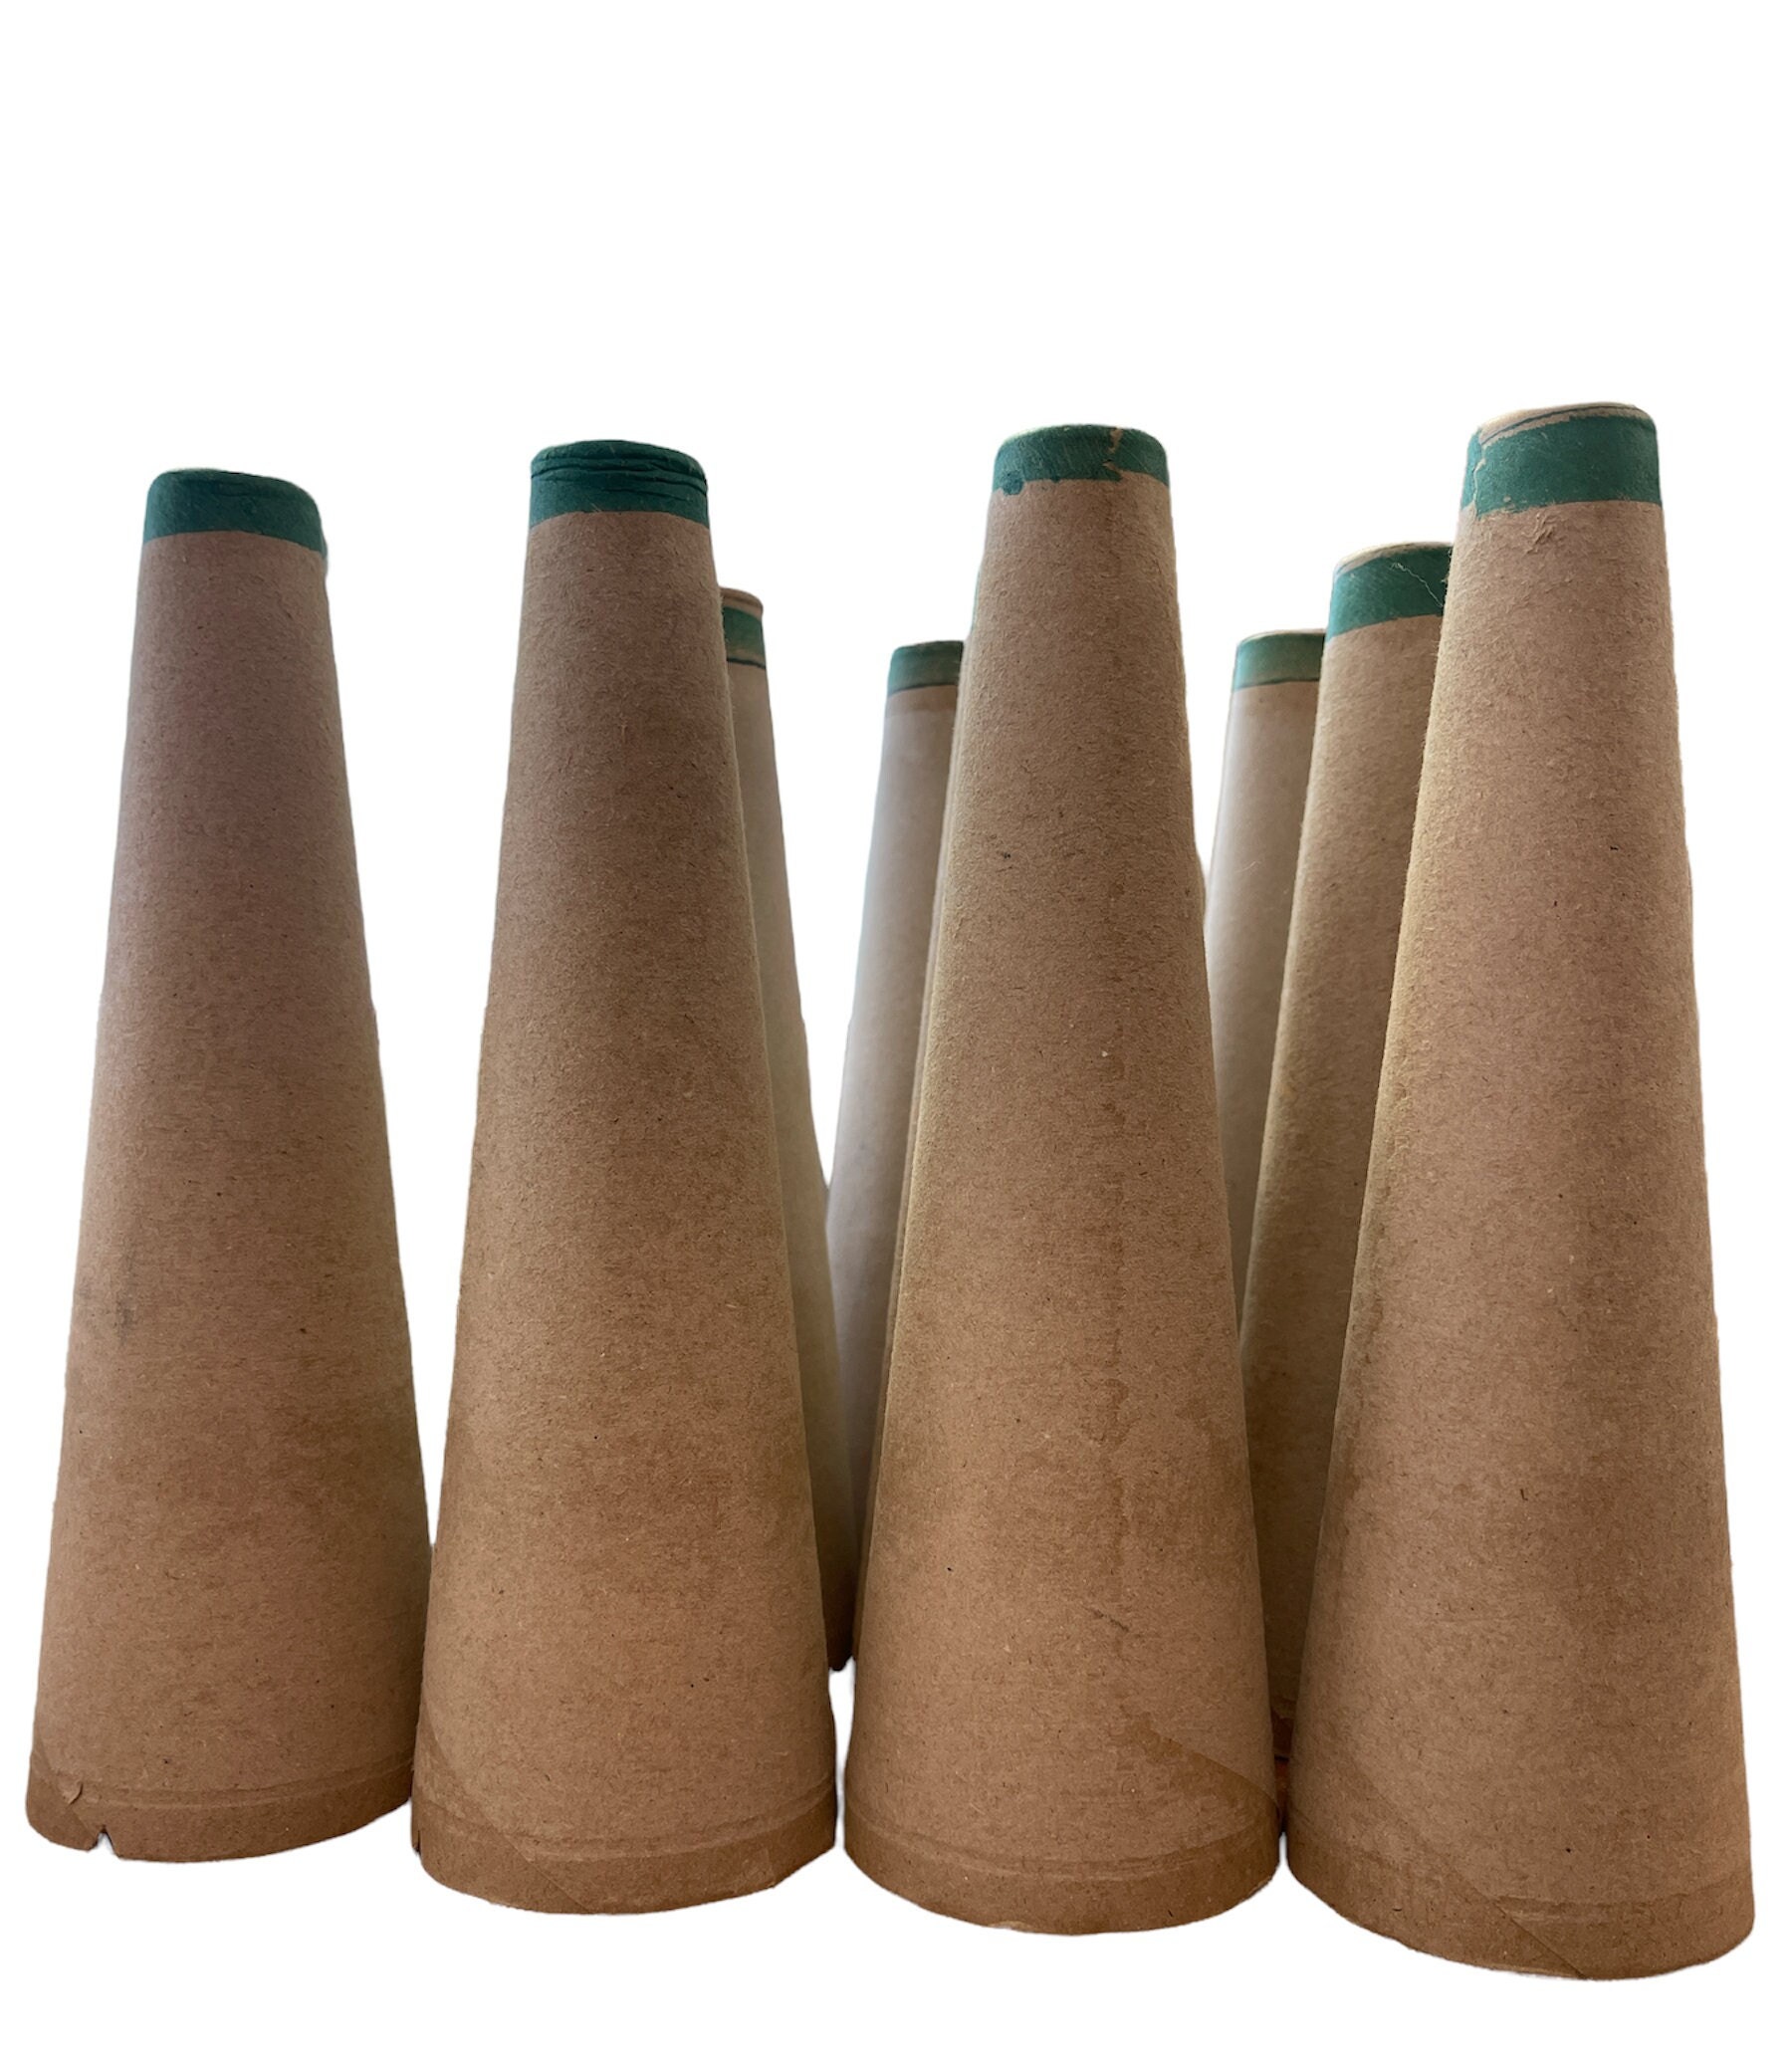 Extra Large Styrofoam Cones in Sets of Two, Two Sizes Height 30 Cm 11.81 or  39.5cm 15.55, Base Diameter 11 Cm 4.33 or 12.5cm 4.92 -  UK